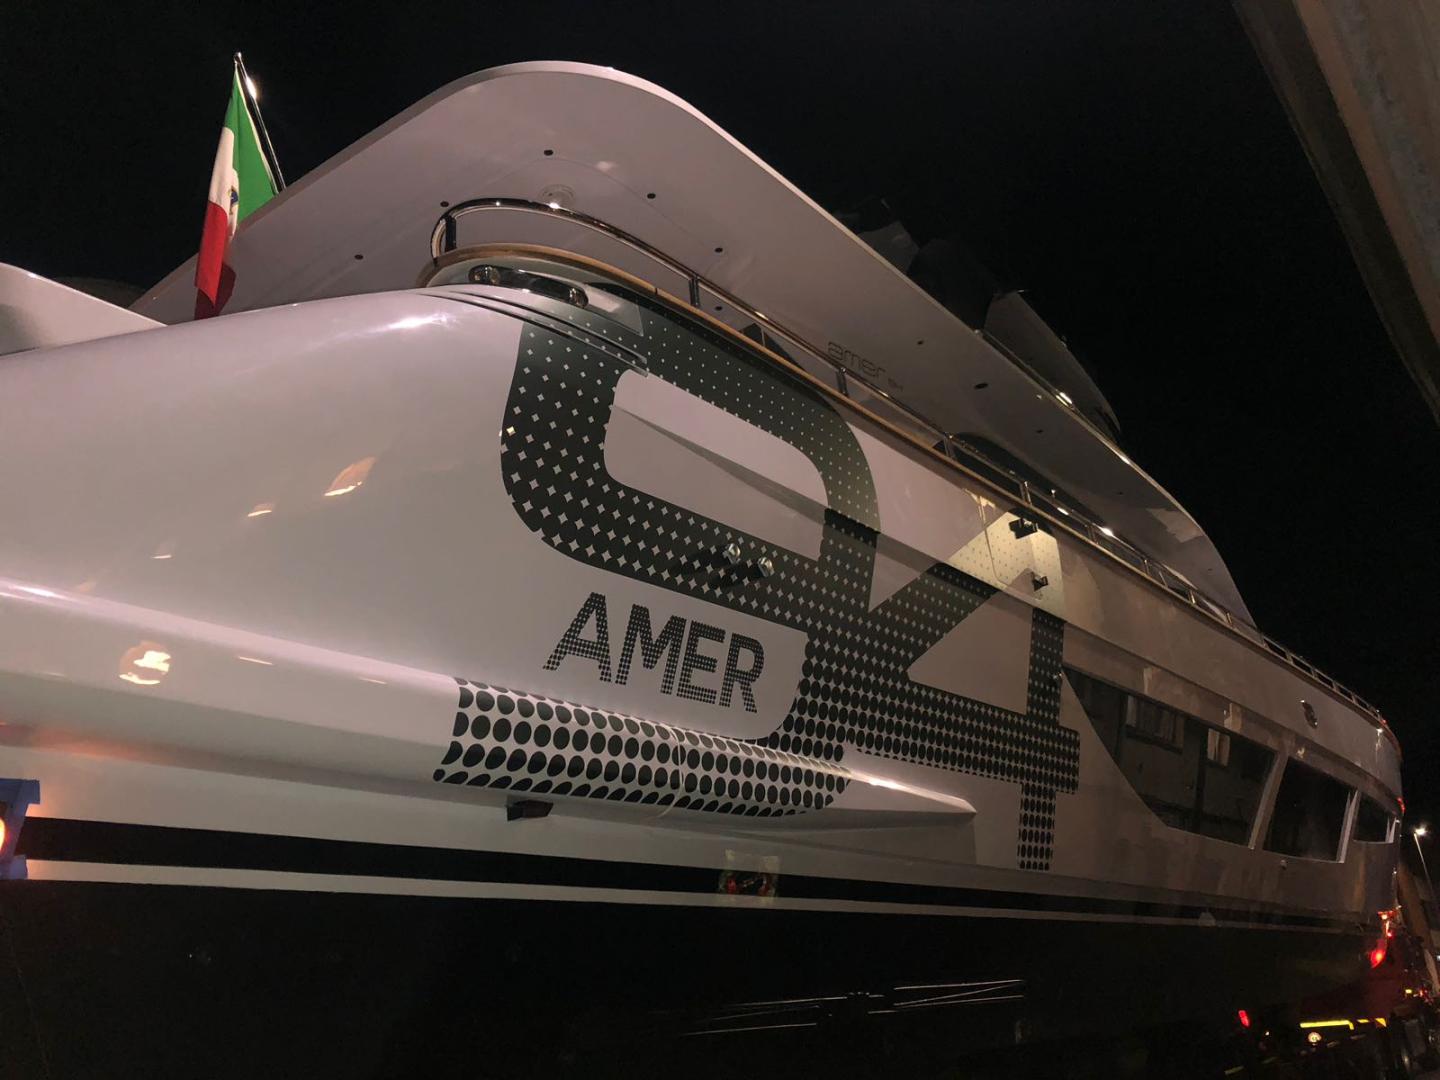 The new Amer 94 yacht is powered by twin Volvo Penta D13-IPS1350.